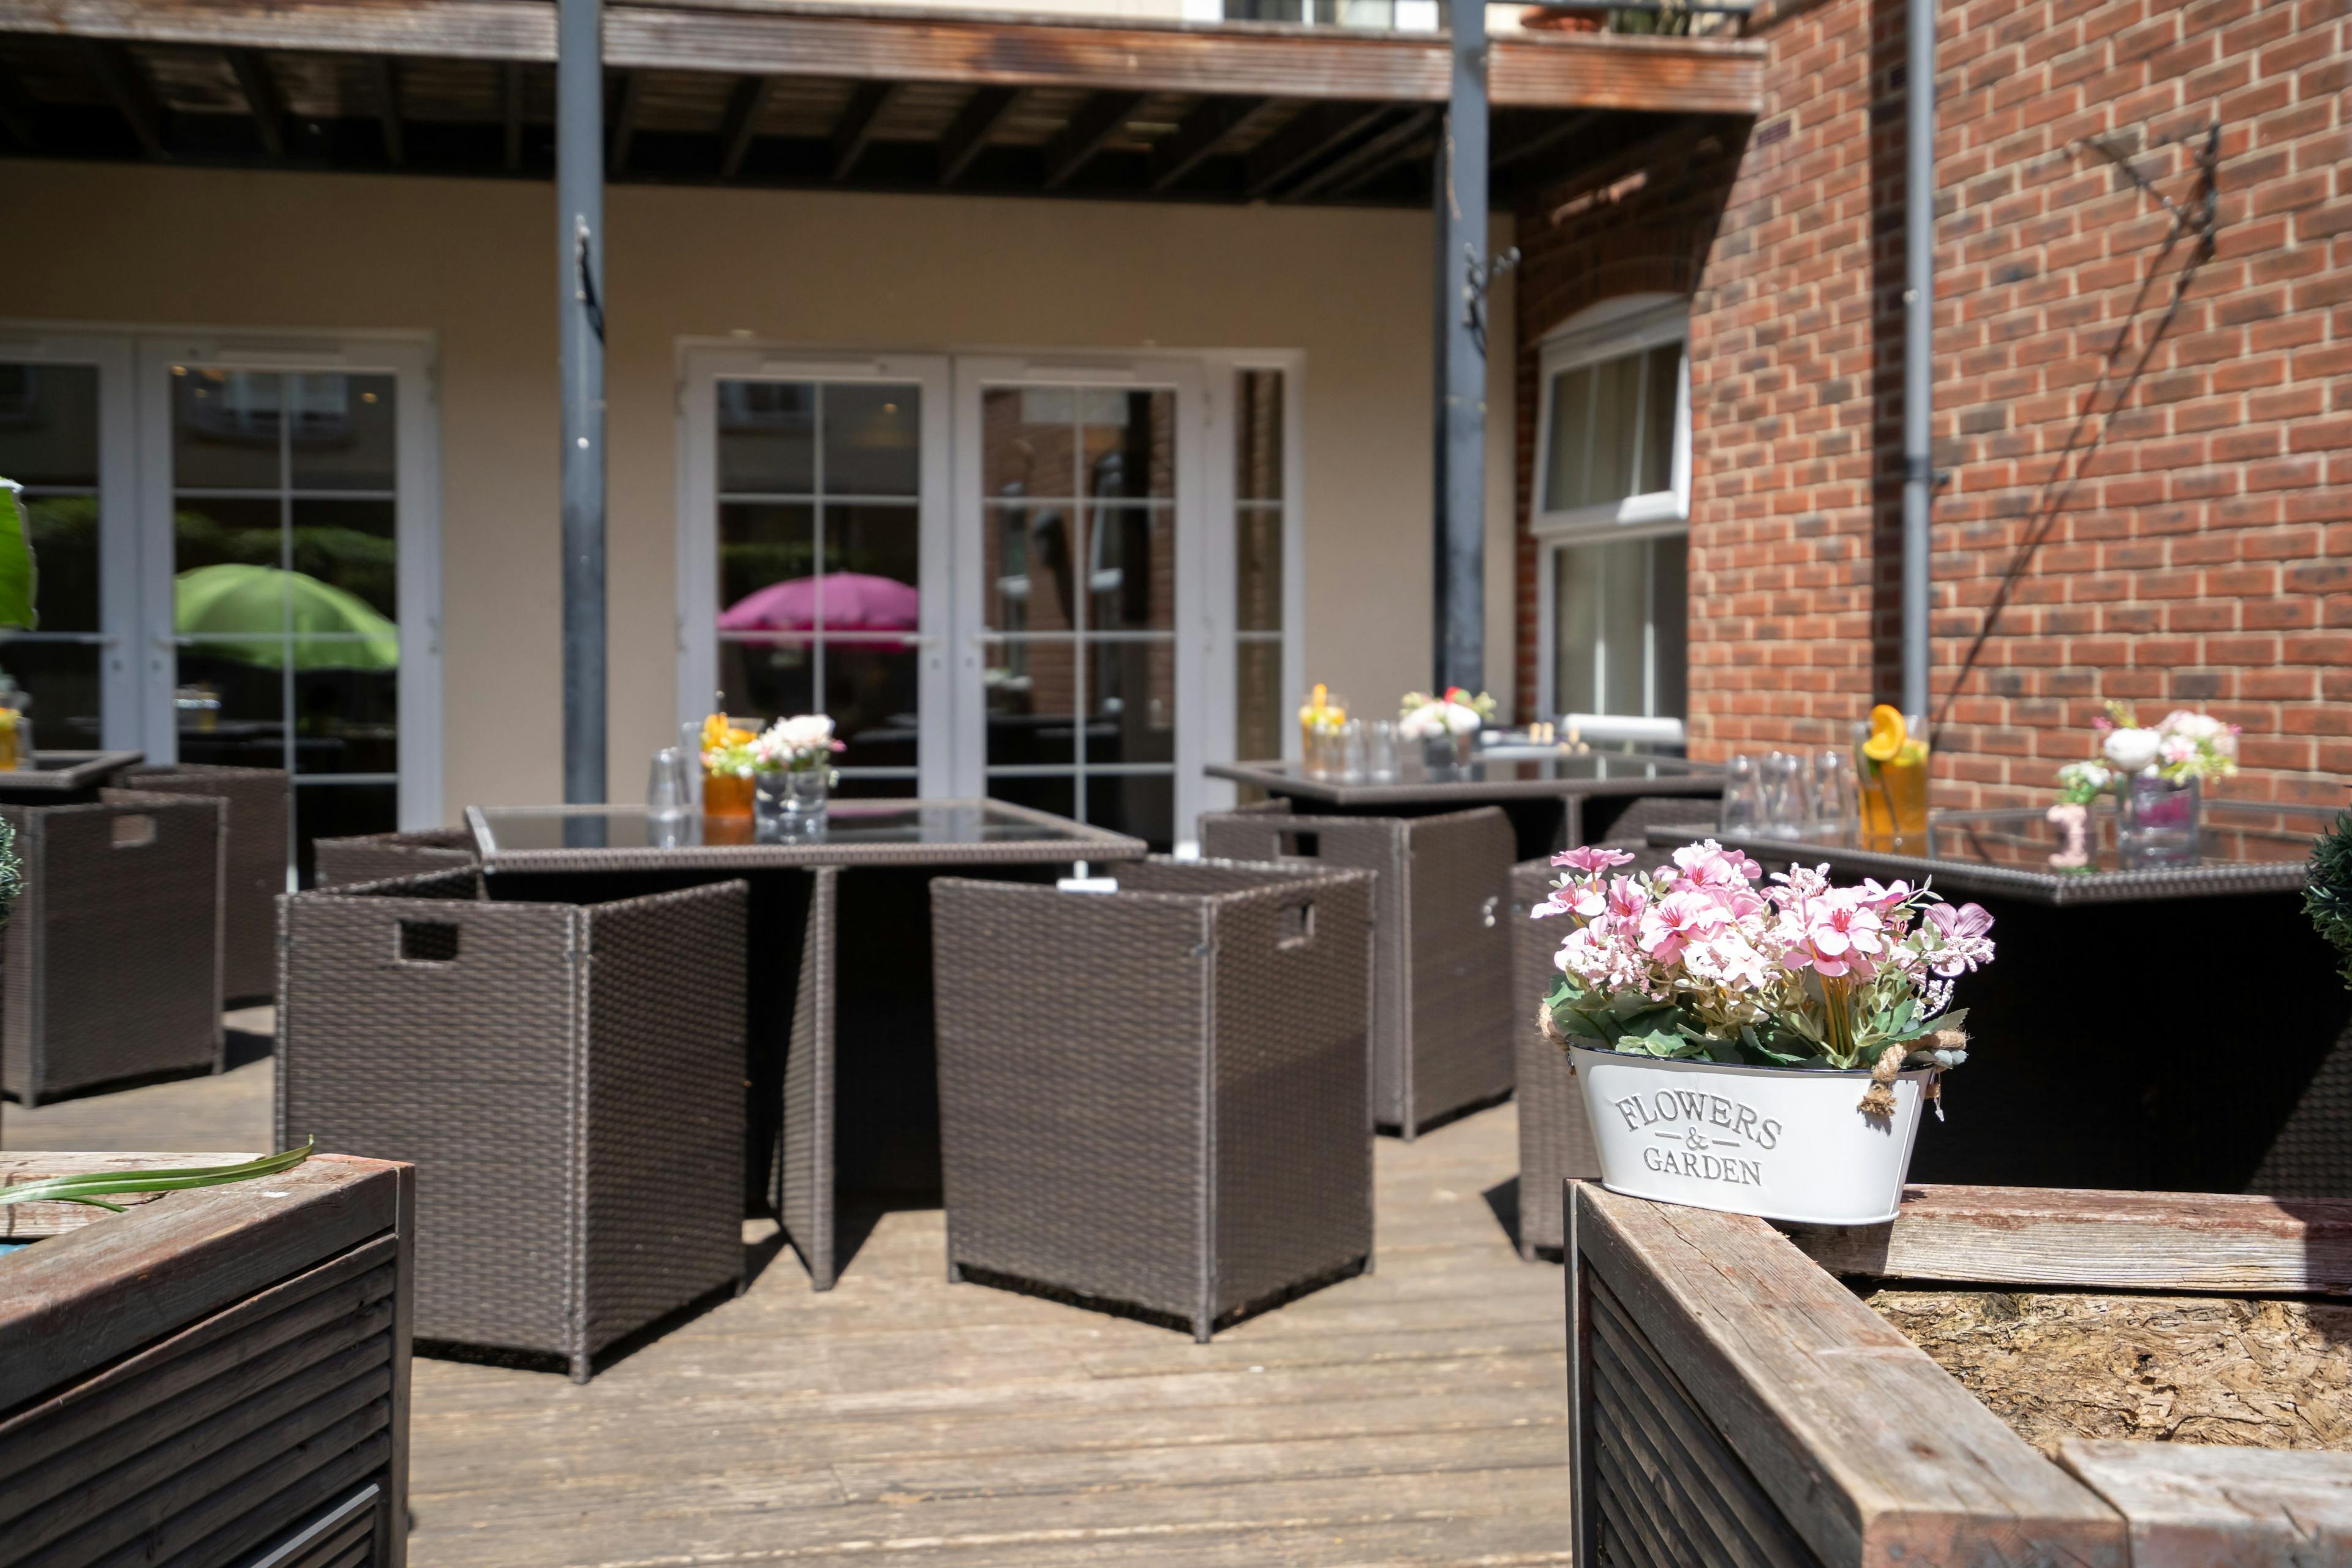 Terrace of Aranlow House Care Home in Poole, Dorset